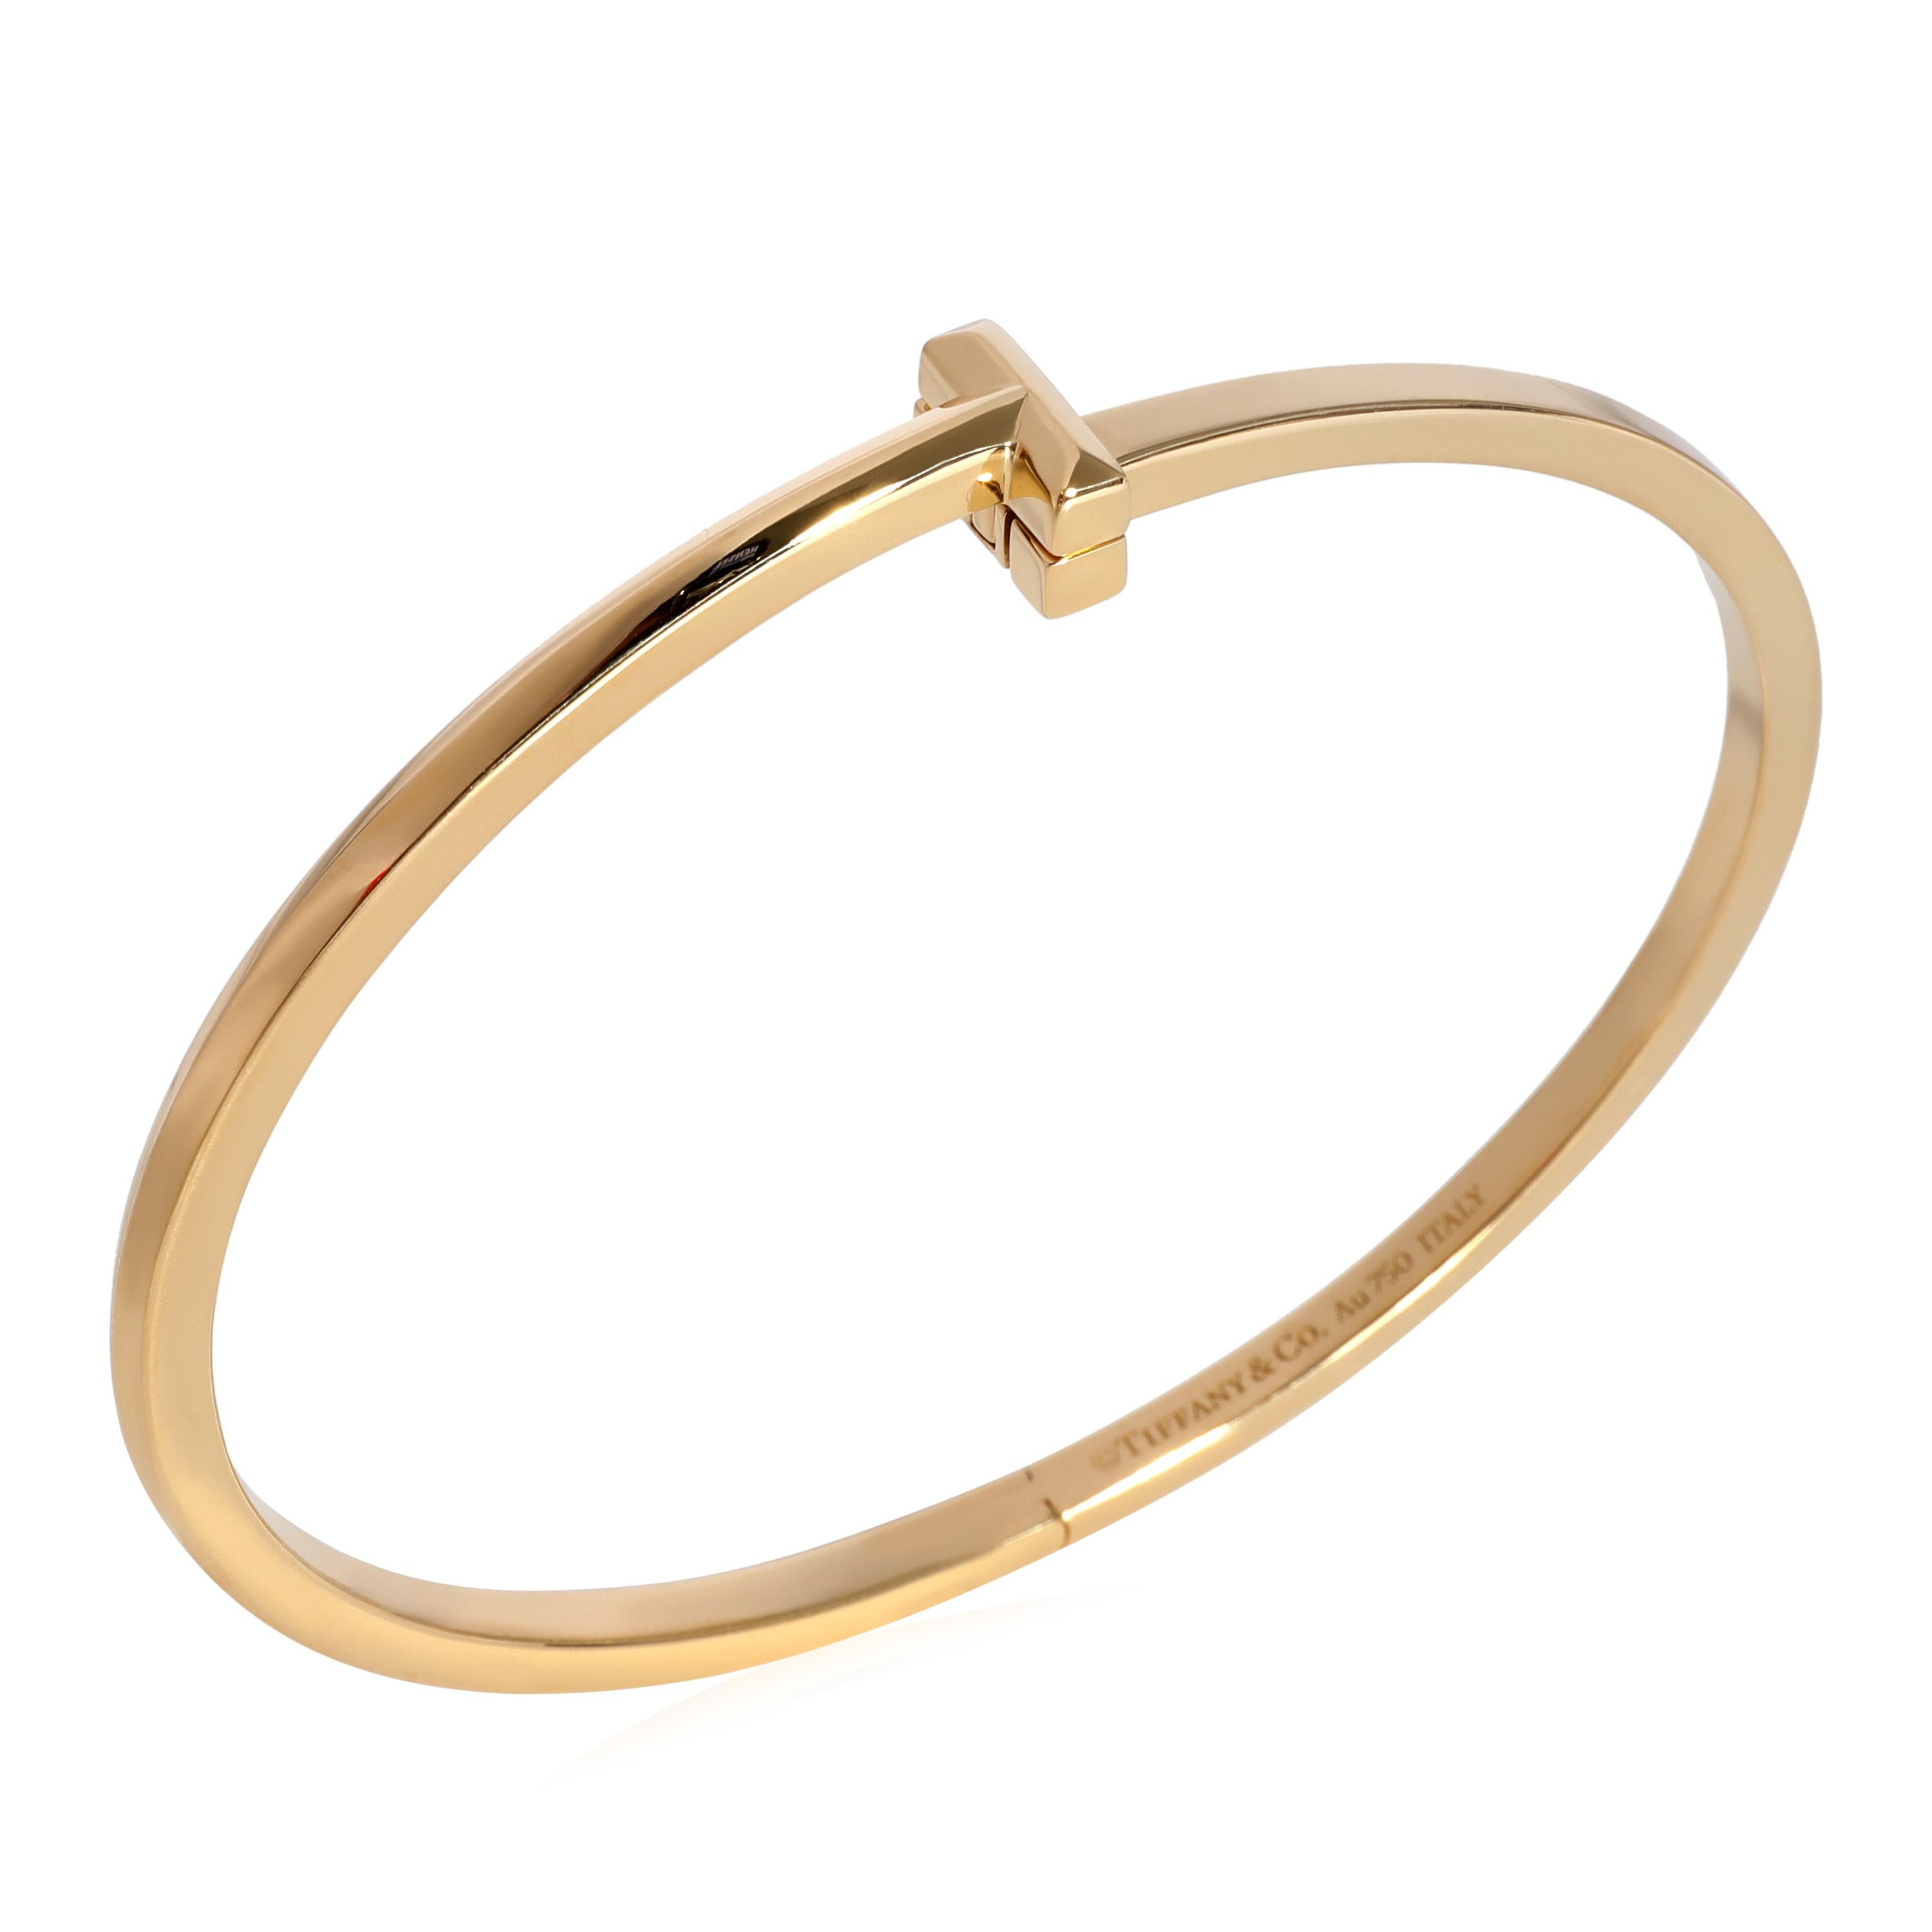 Tiffany & Co. Tiffany T1 Narrow Hinged Bangle in 18k Yellow Gold

PRIMARY DETAILS
SKU: 123504
Listing Title: Tiffany & Co. Tiffany T1 Narrow Hinged Bangle in 18k Yellow Gold
Condition Description: Retails for 4200 USD. In excellent condition and